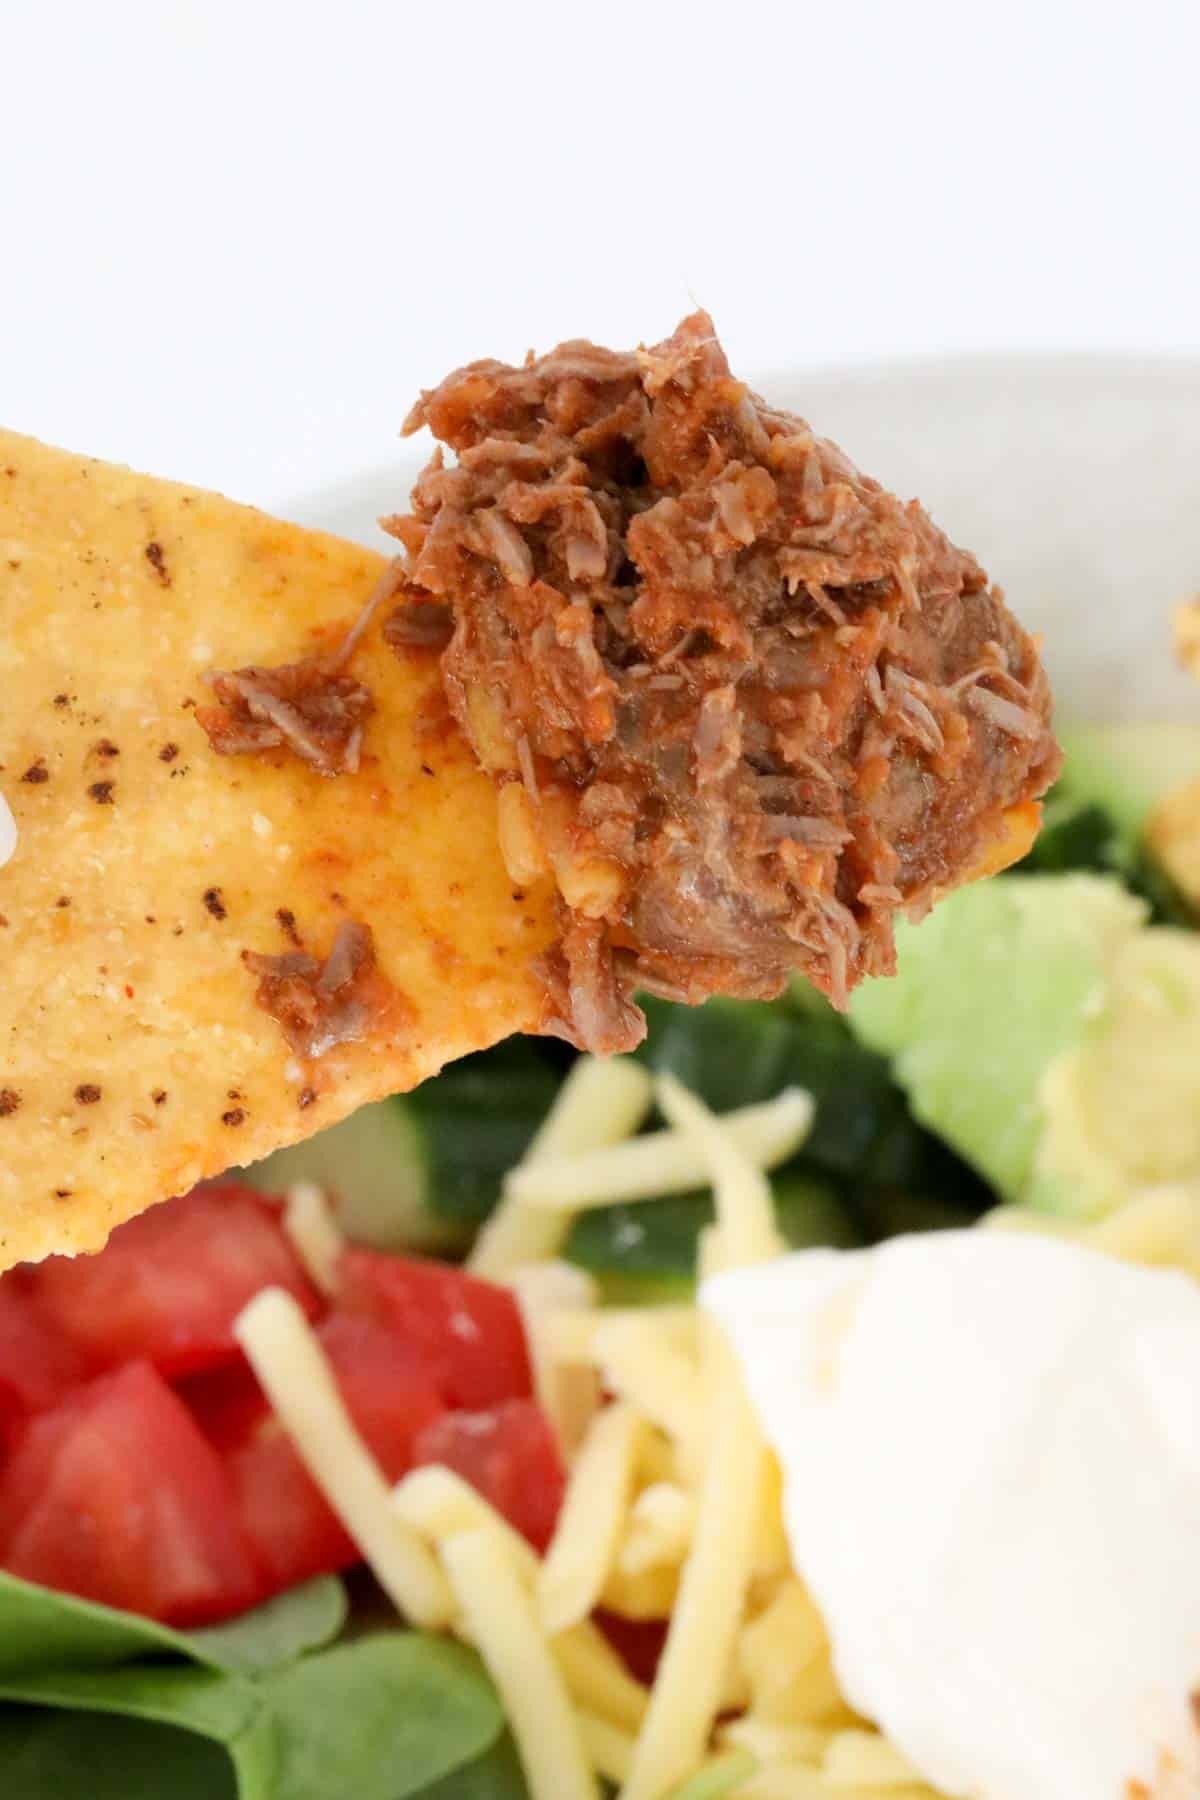 Shredded Mexican beef on a corn chip.